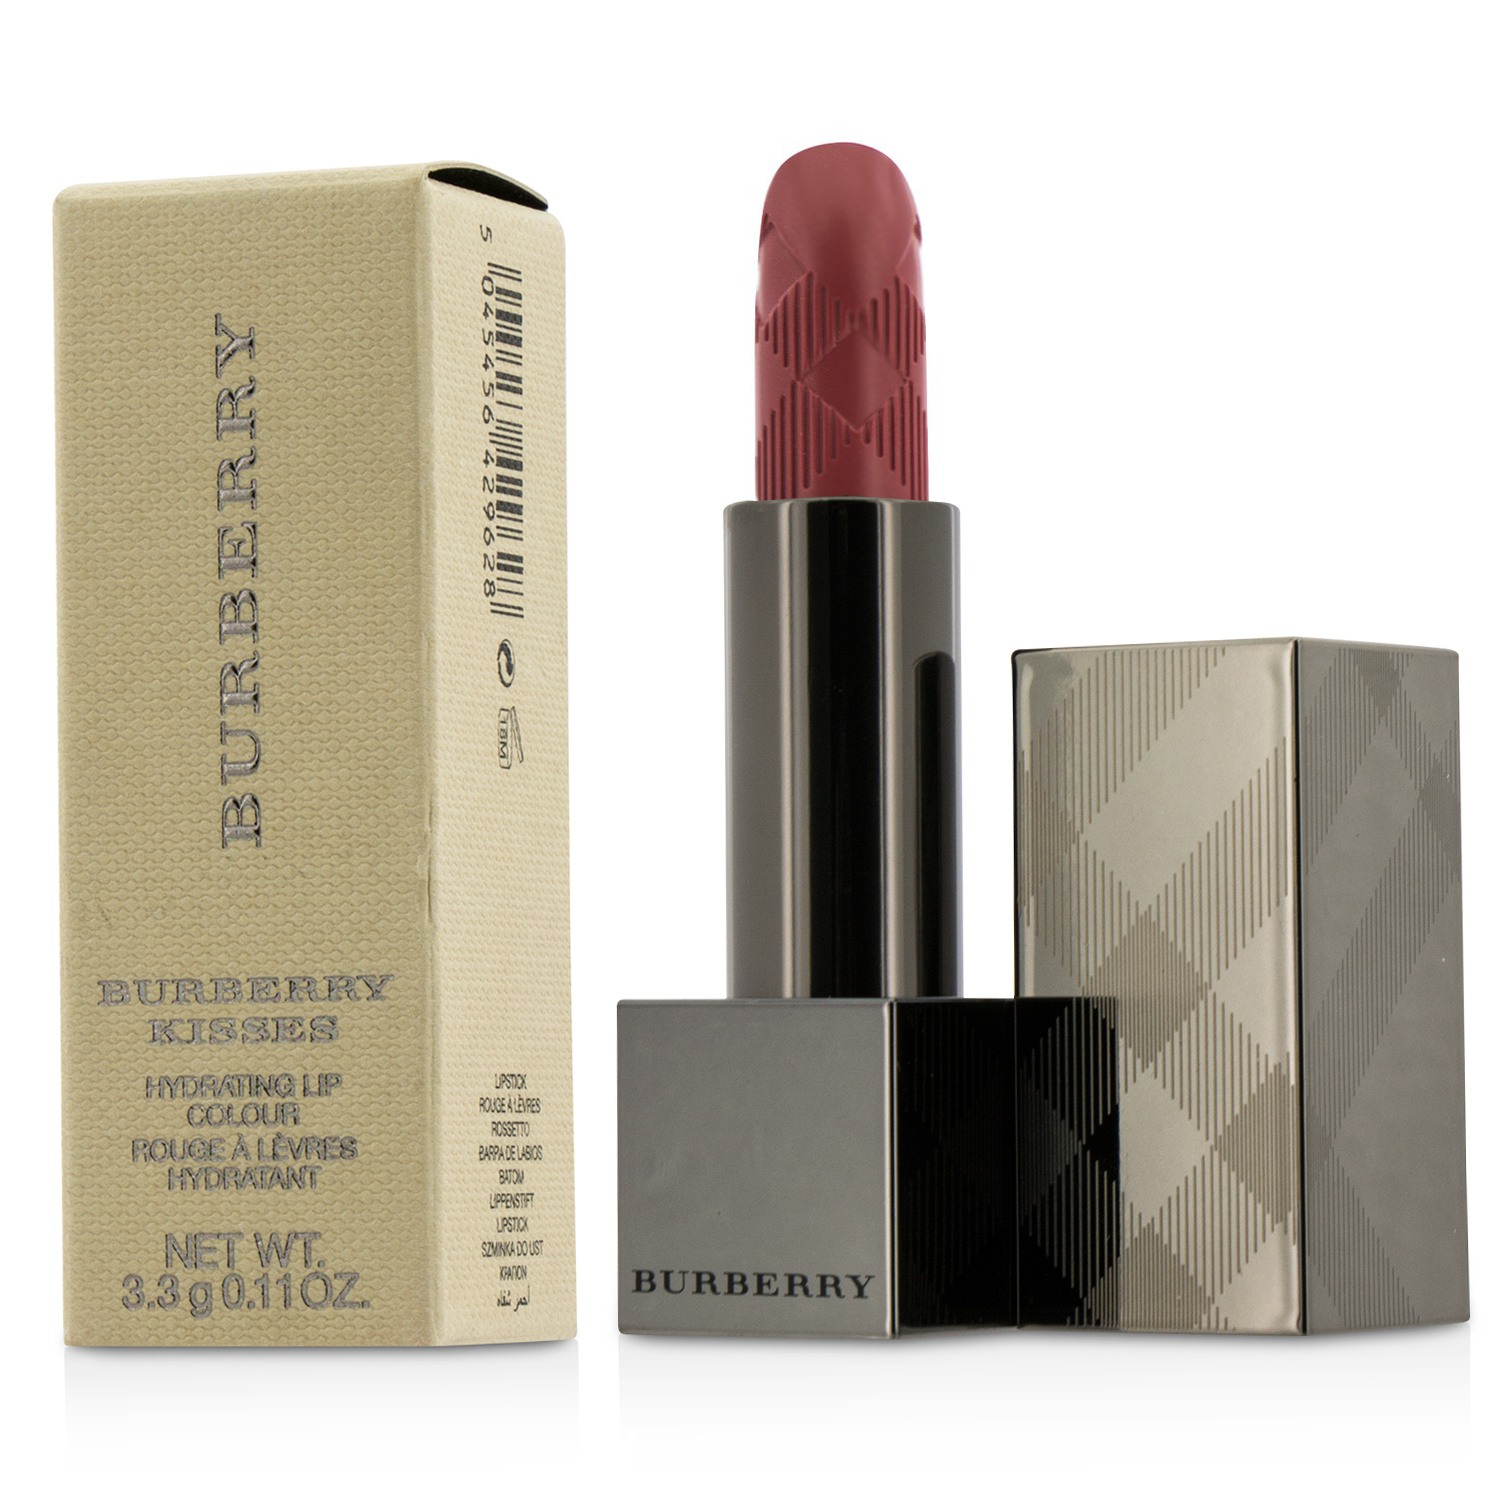 Burberry Kisses Hydrating Lip Colour - # No. 37 Pink Peony Burberry Image